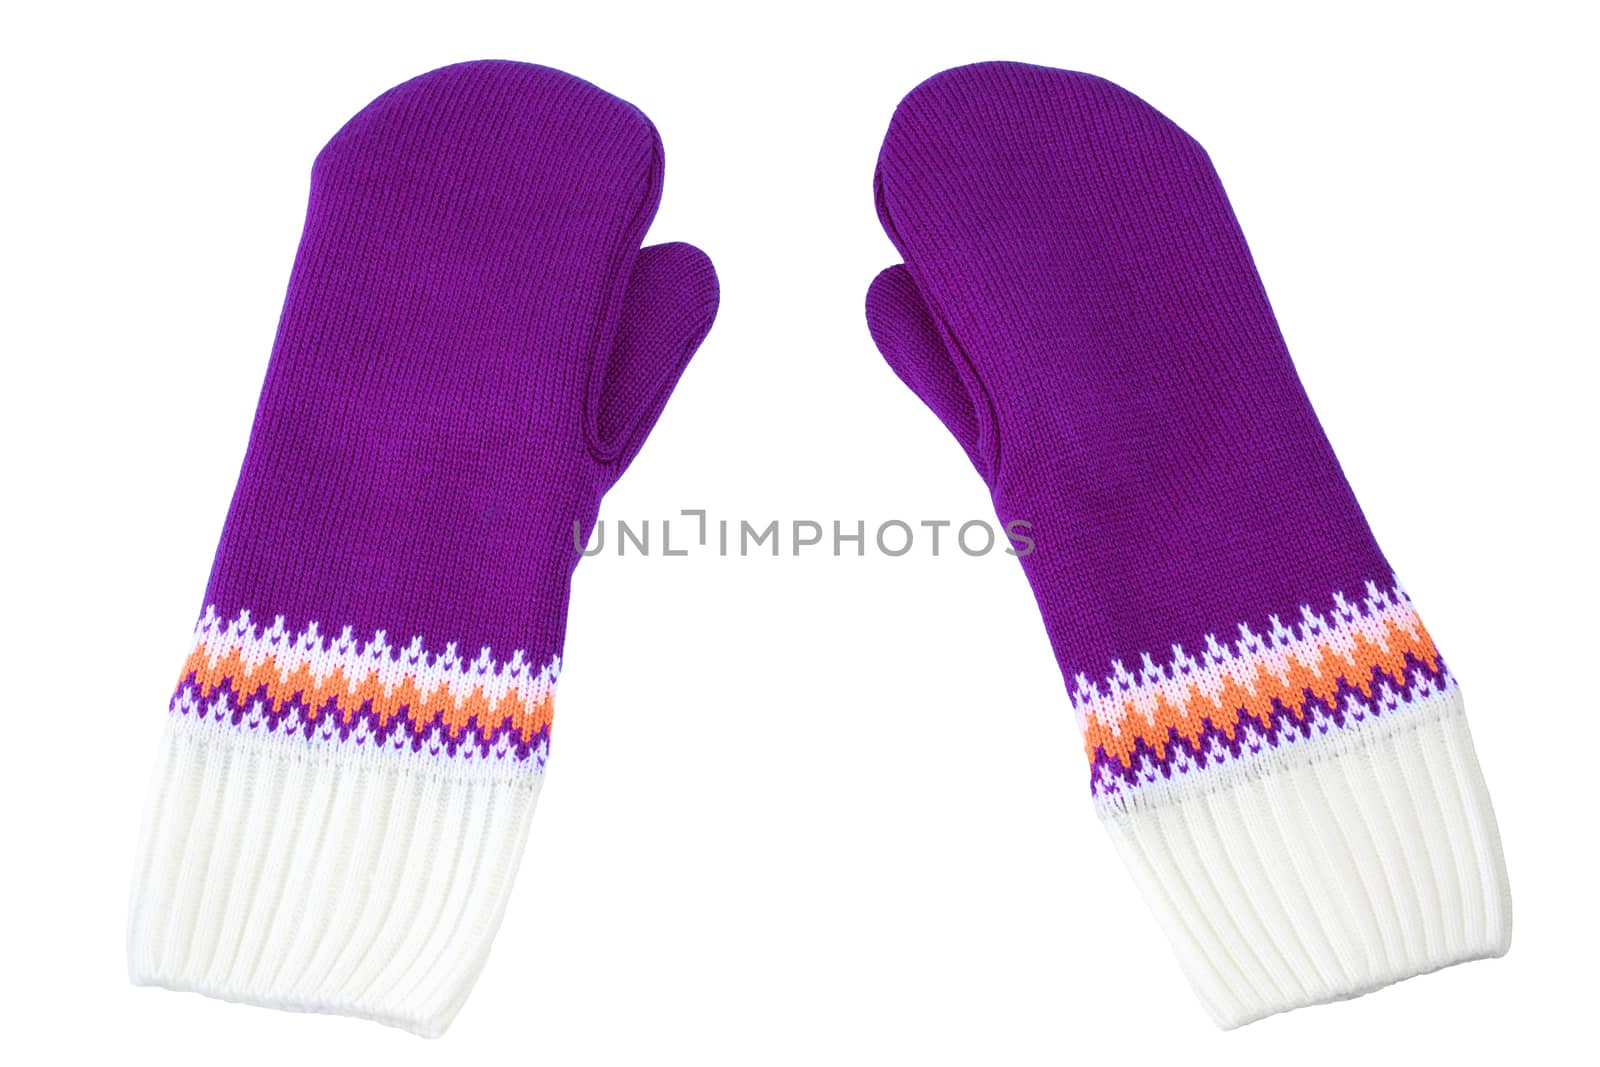 purple and white knited mittens isolated on white background.